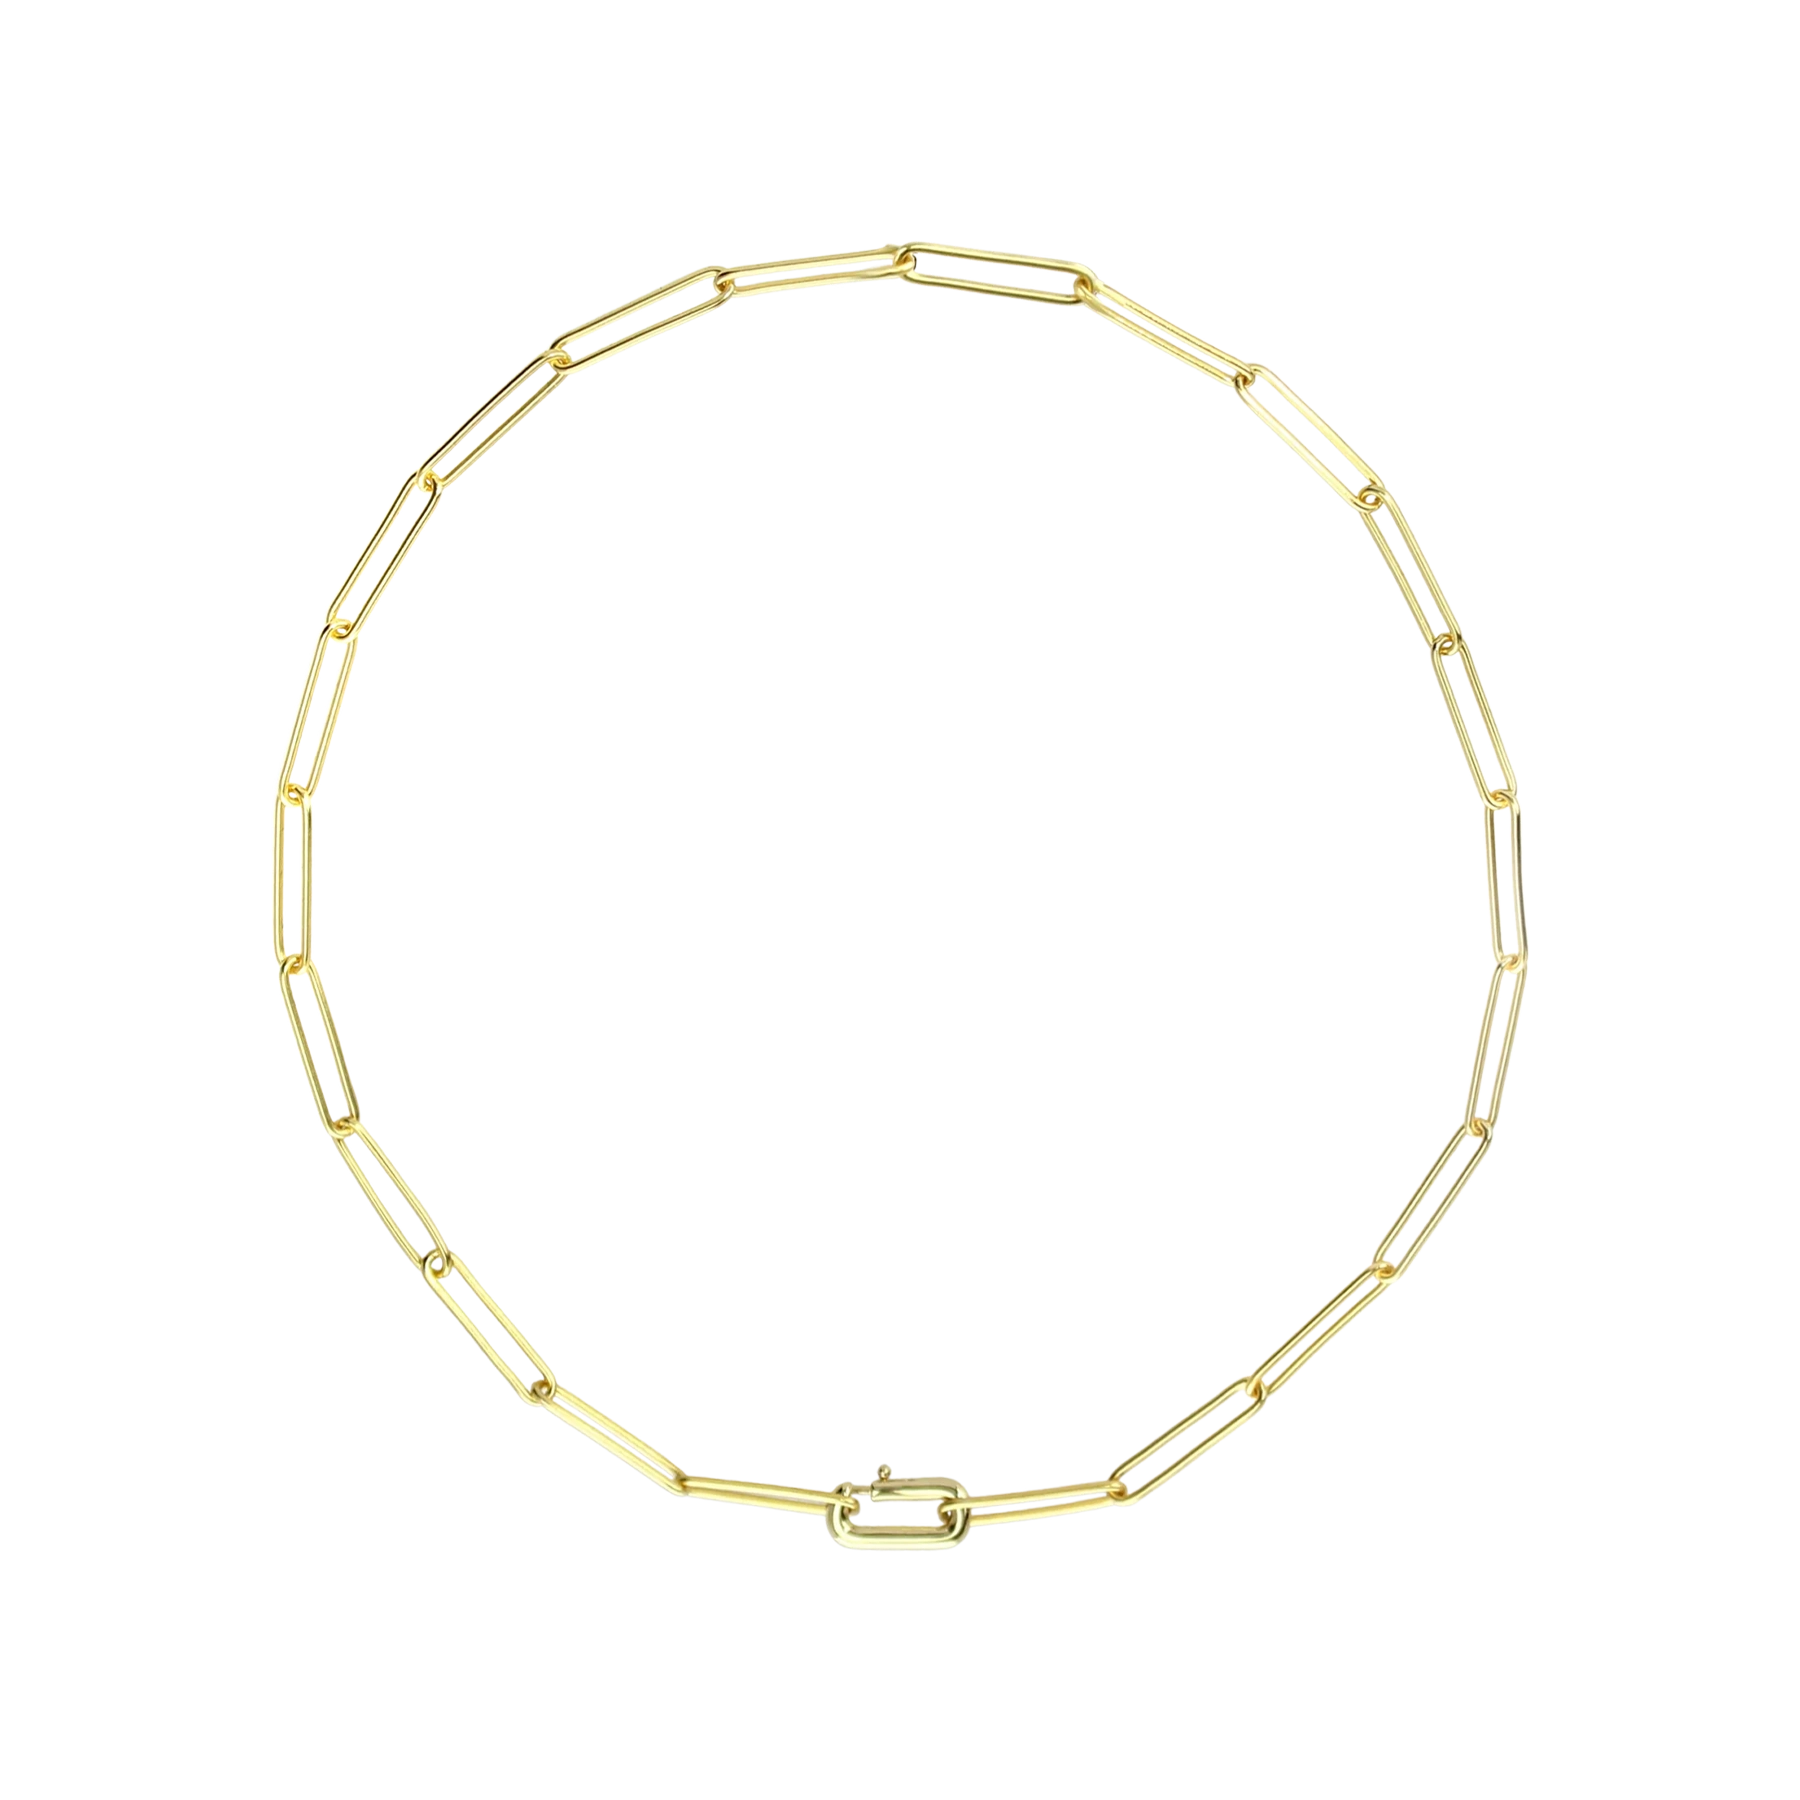 Cuffed Love 18k Gold Plated Chain Link Necklace